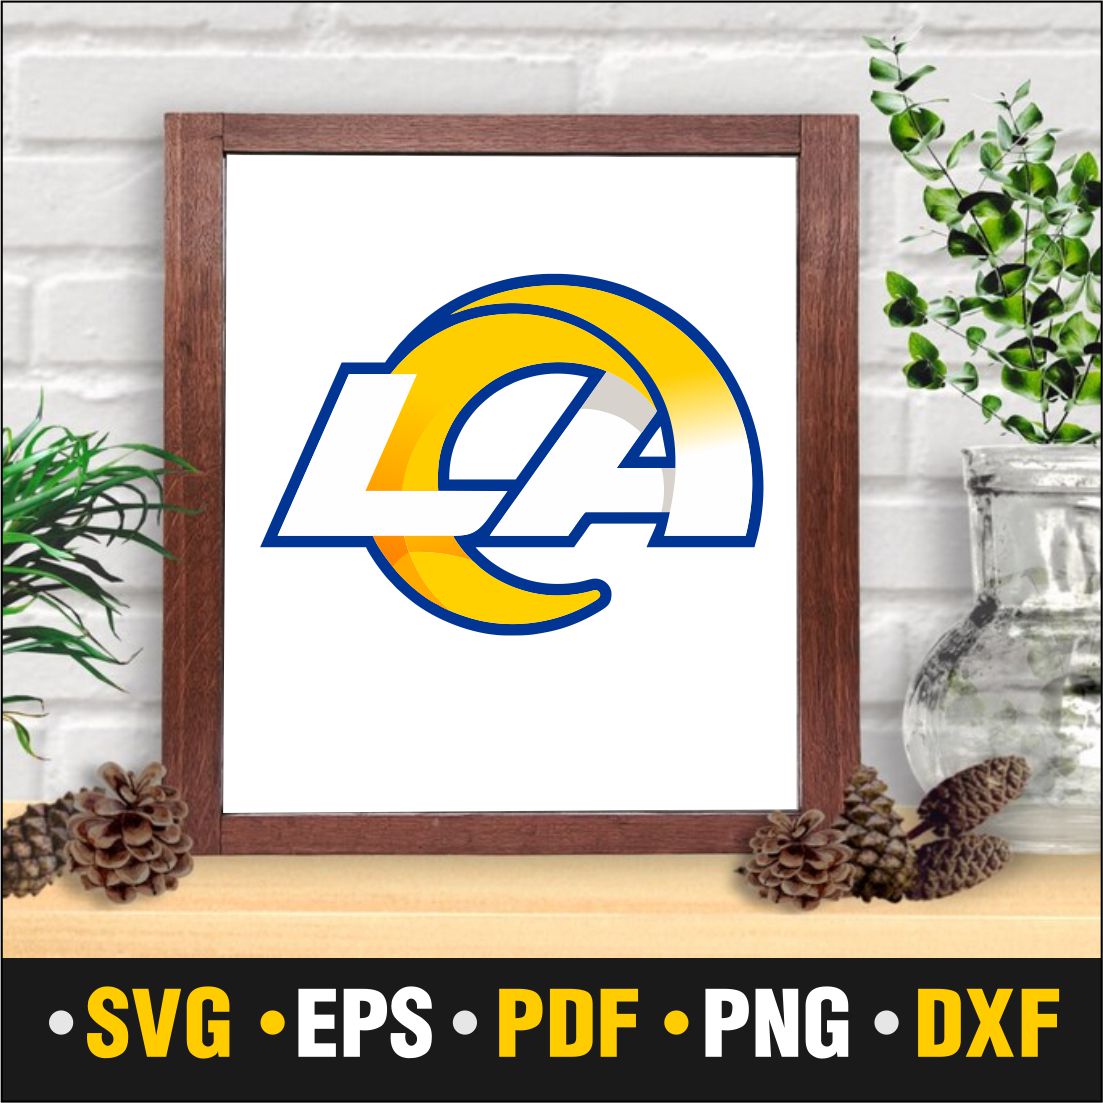 Evergreen Los Angeles Rams Helmet 19 in. x 15 in. Plug-in LED Lighted Sign  8LED3828HMT - The Home Depot